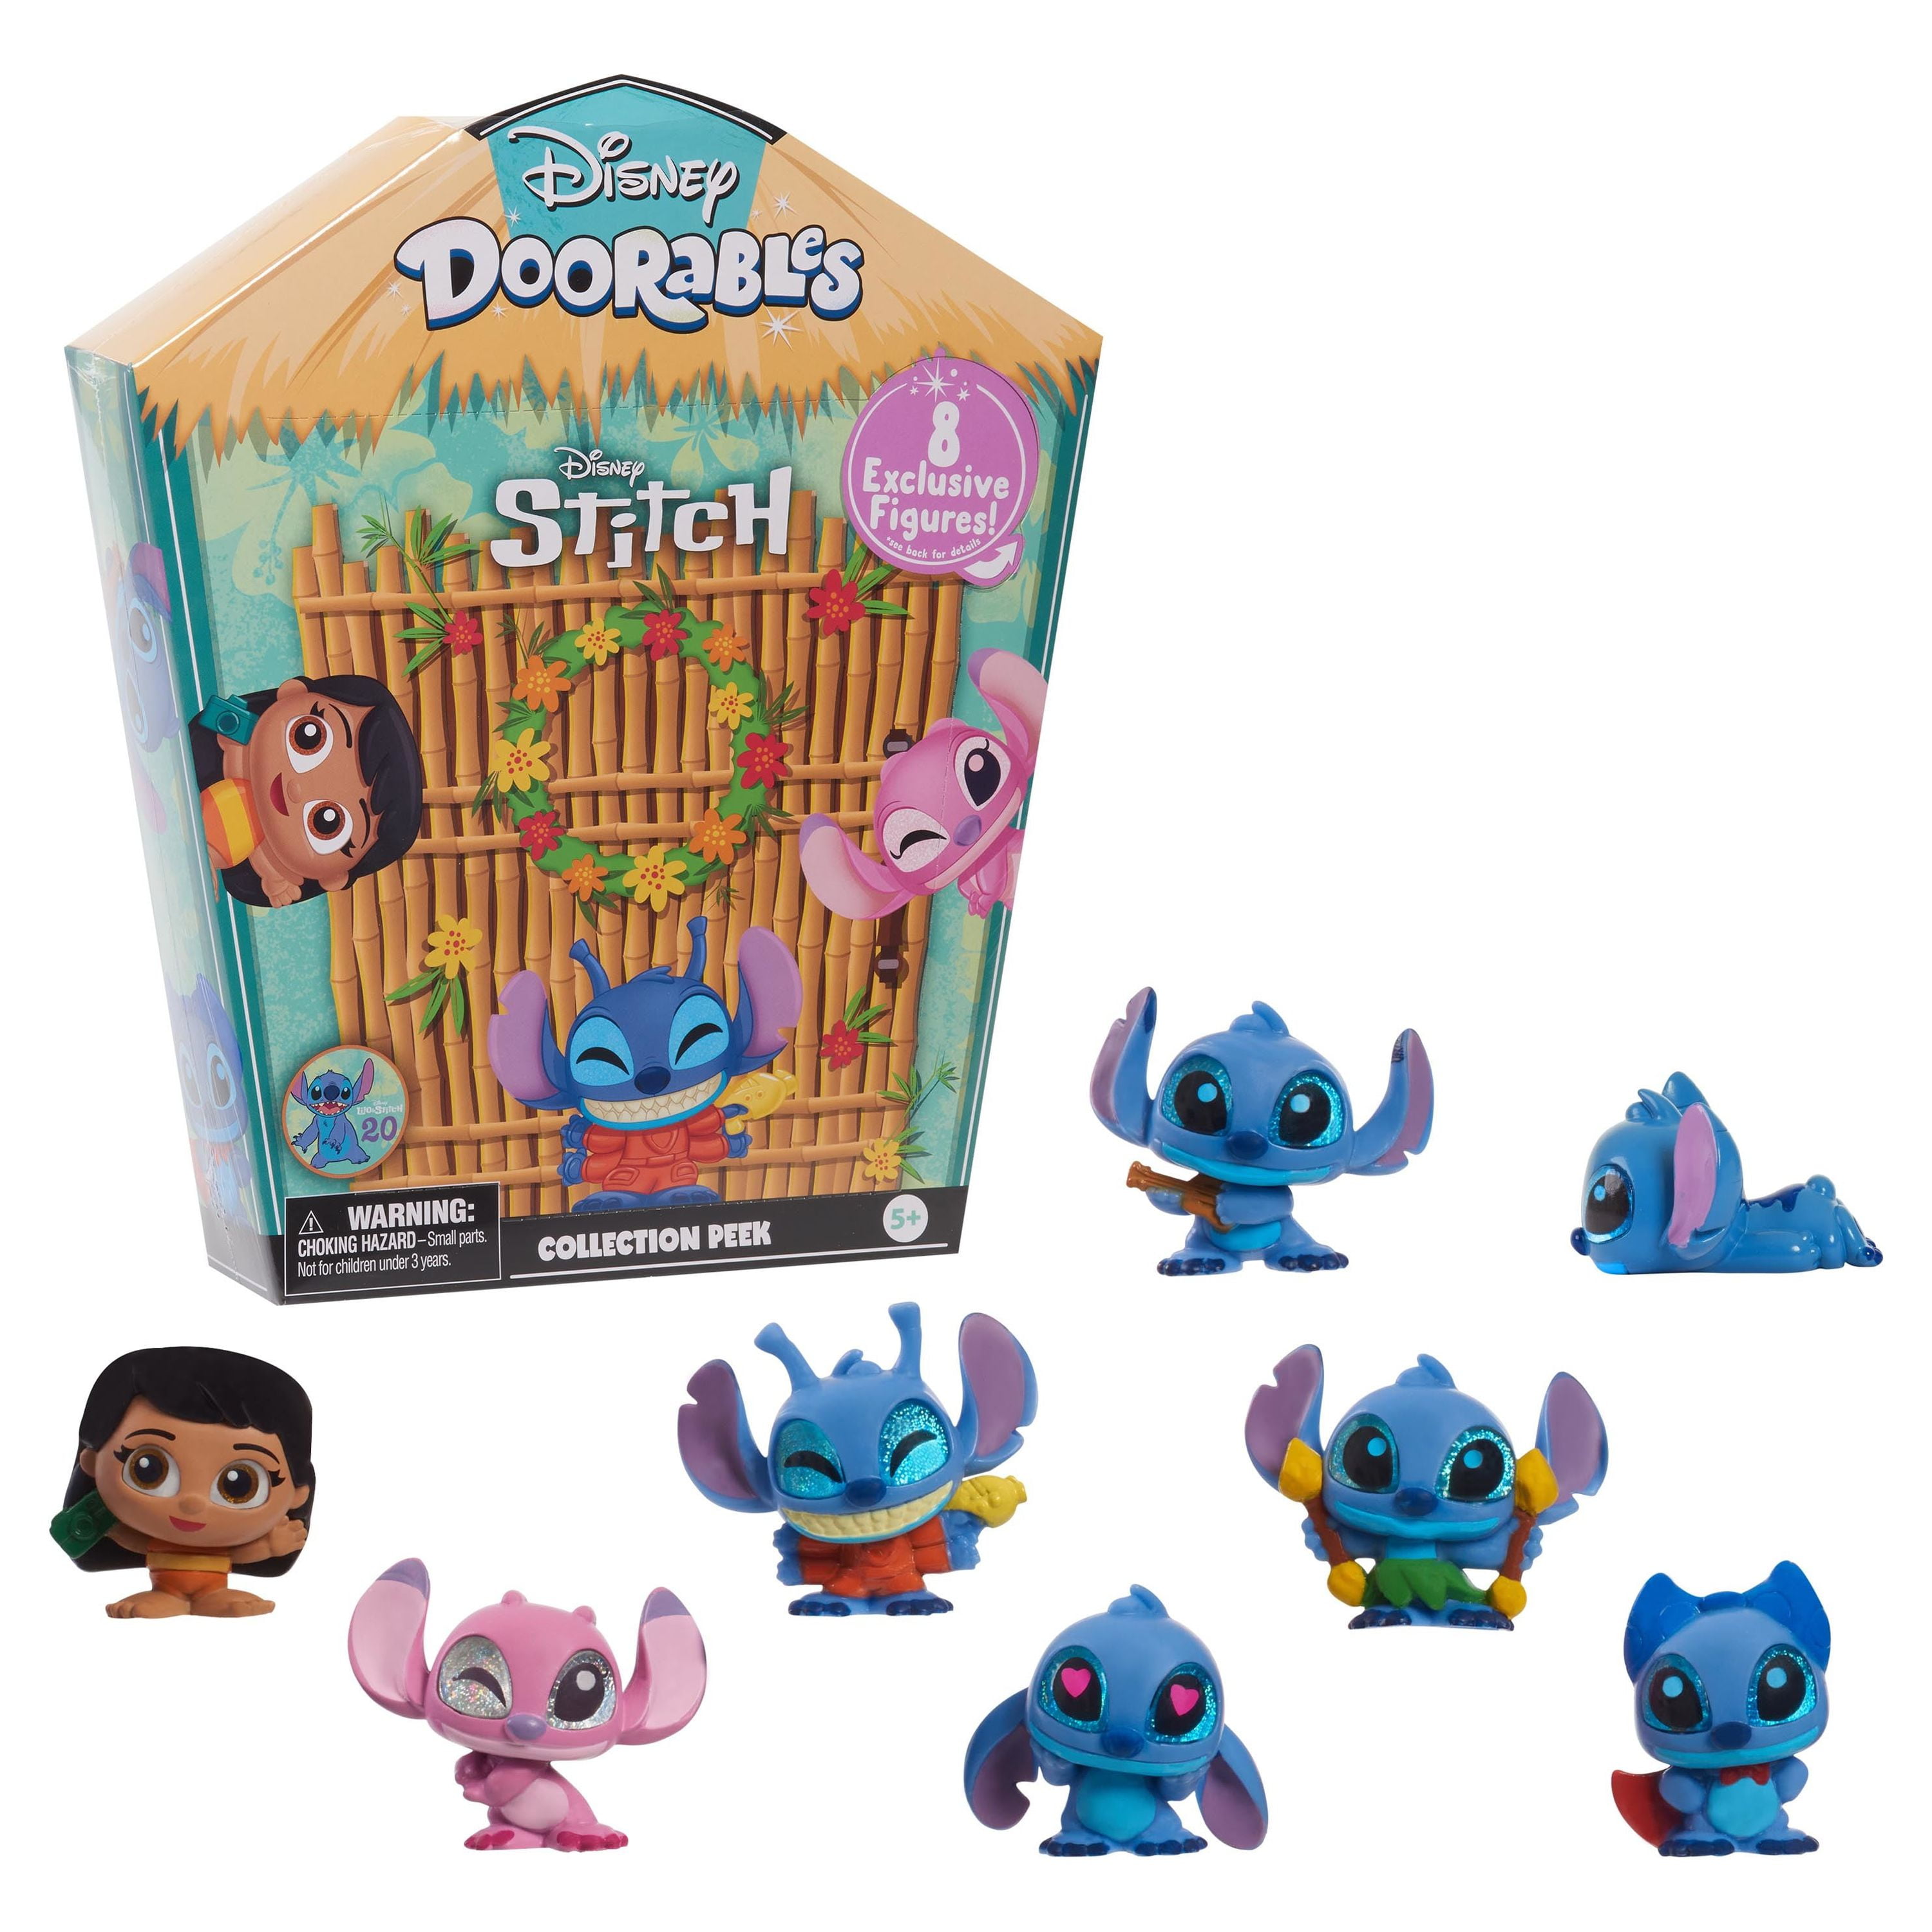 Disney Doorables Stitch Collection Peek, Officially Licensed Kids Toys for  Ages 5 Up, Gifts and Presents